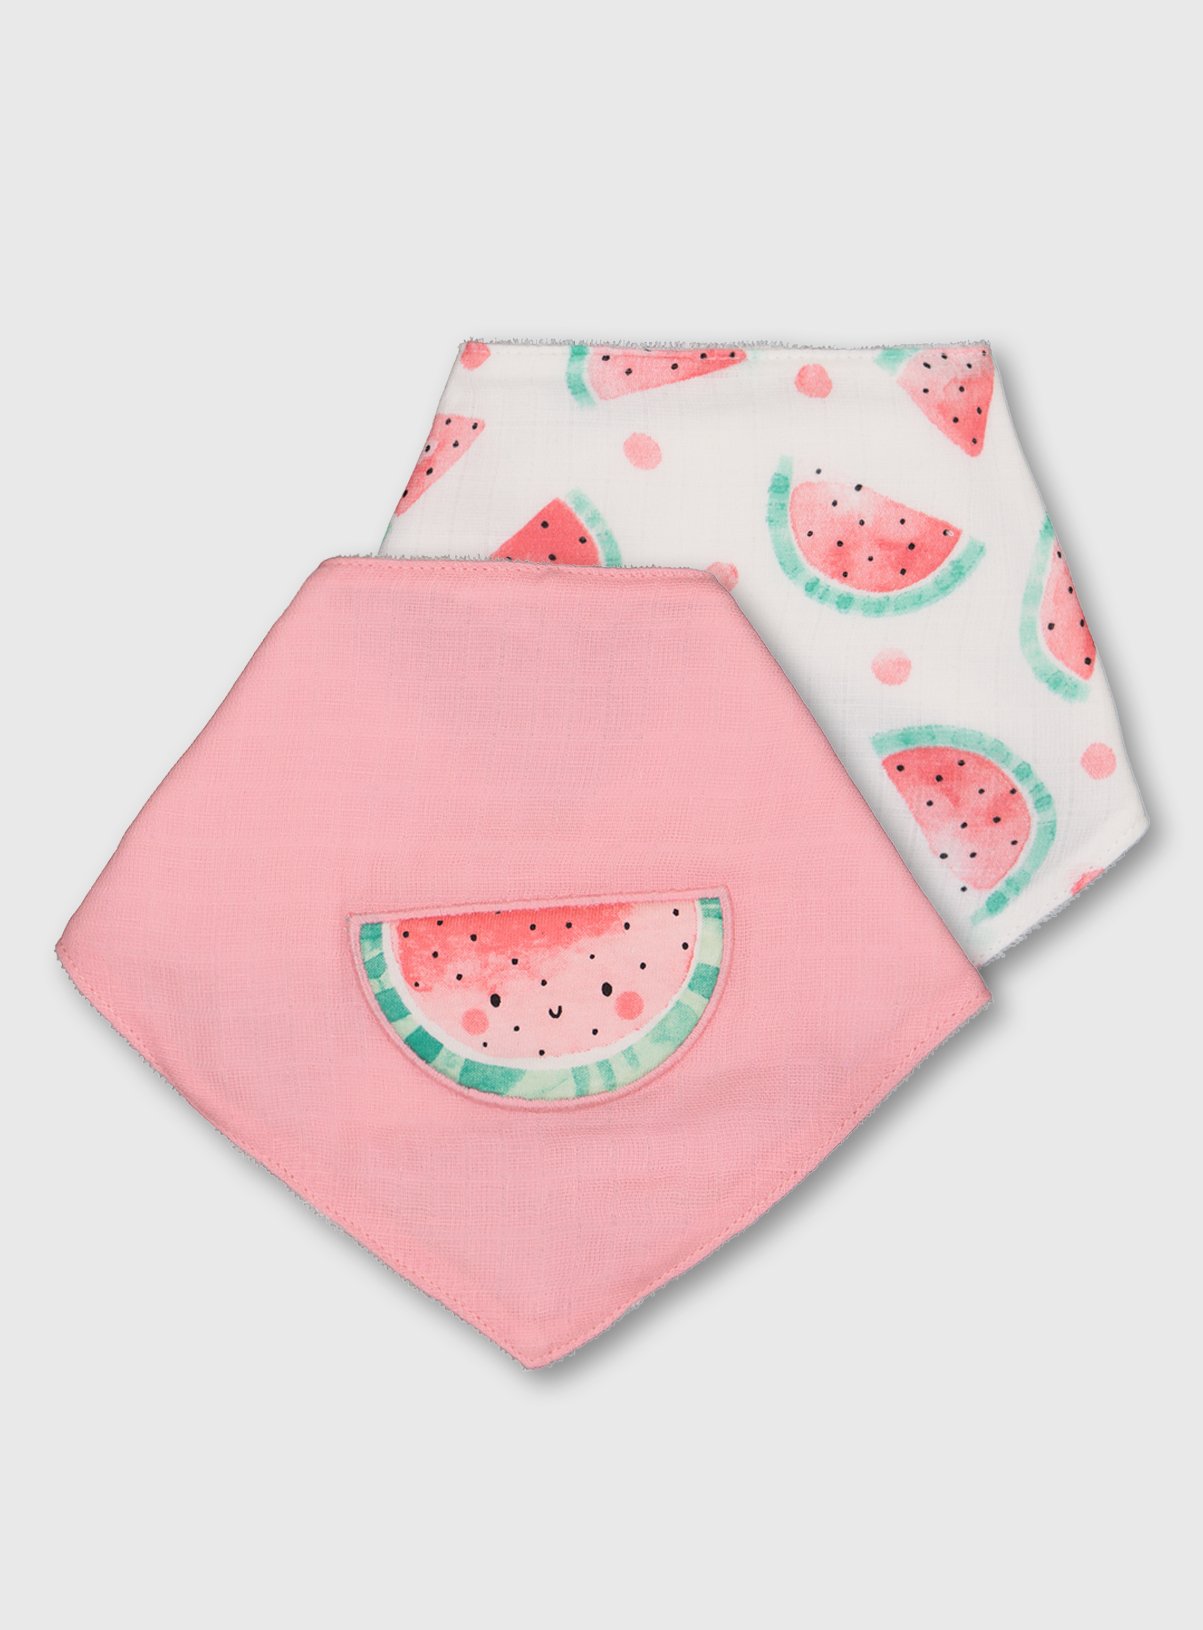 Pink & White Watermelon Hanky Bibs 2 Pack Review